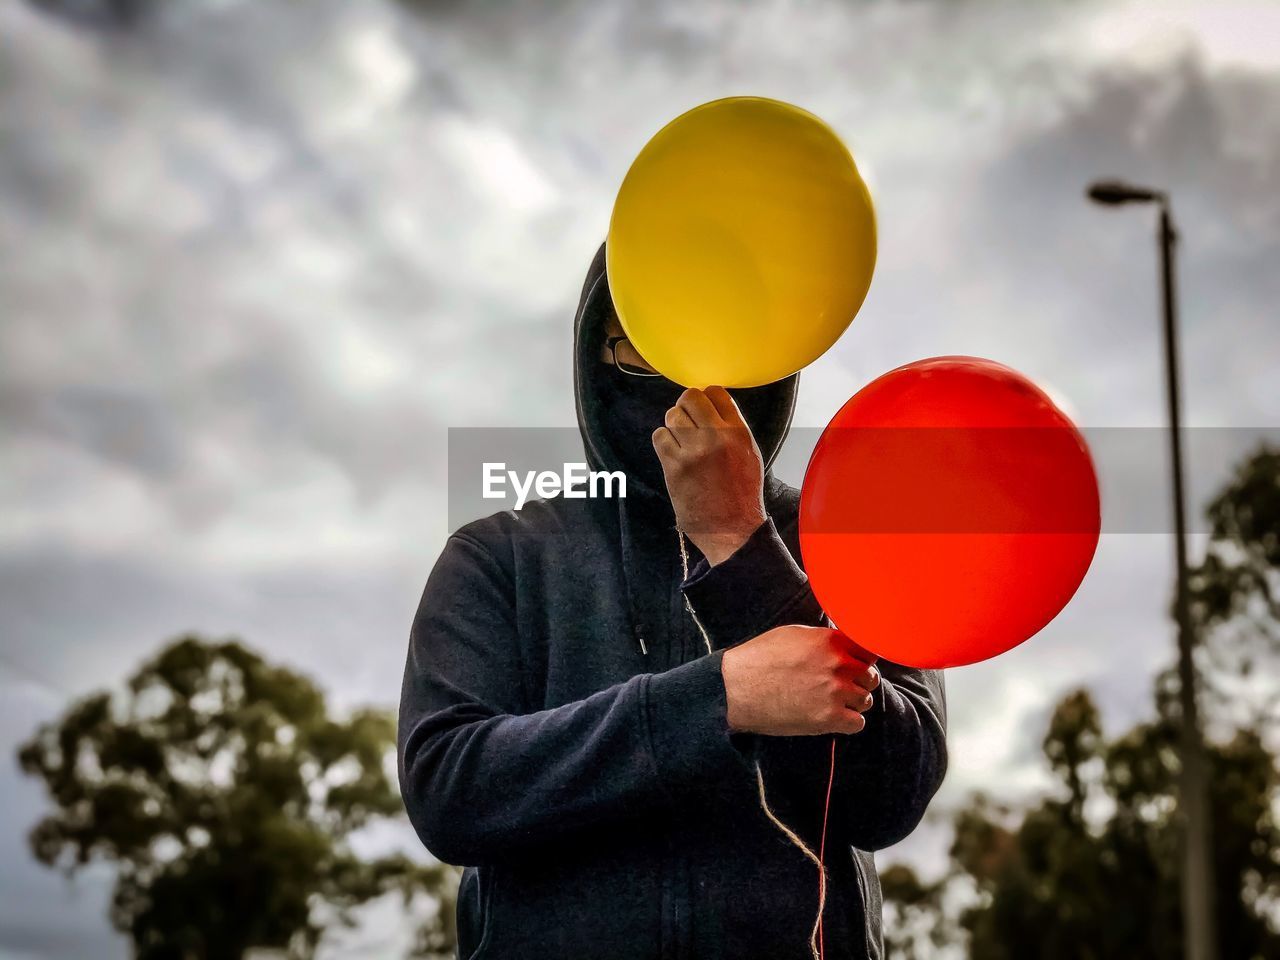 Person holding red and yellow balloons against sky.